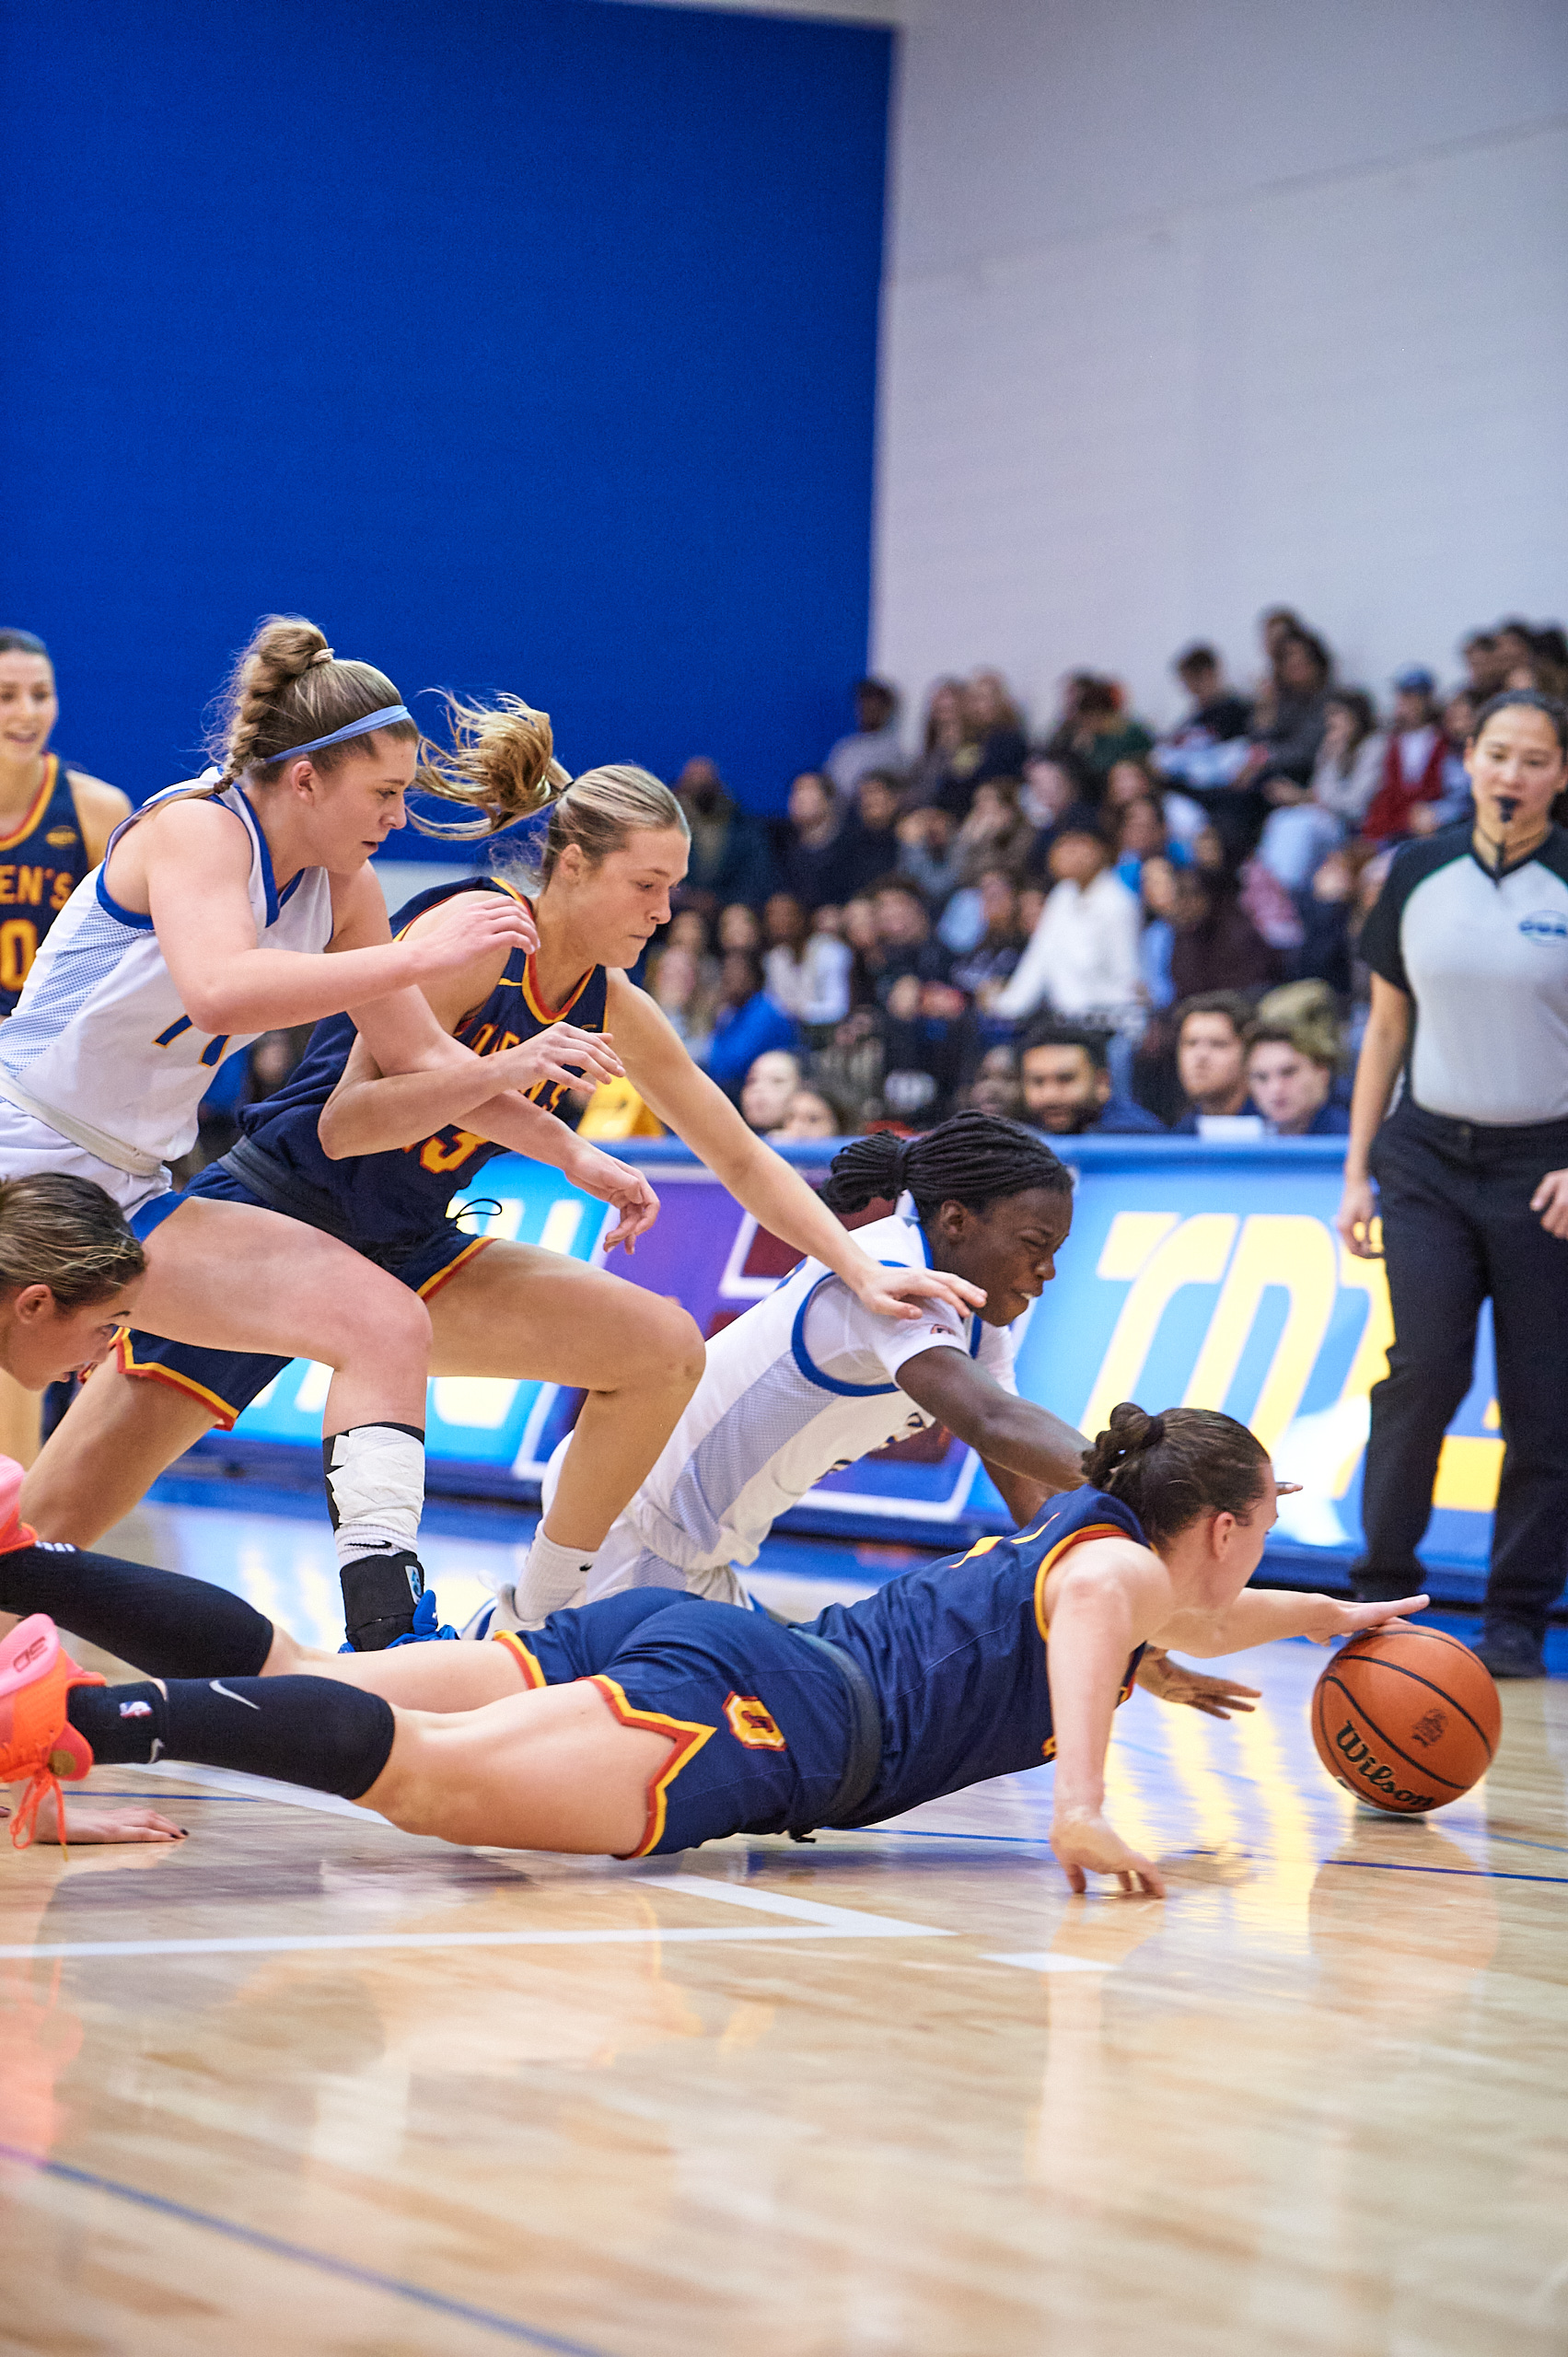 Players from TMU and Queen's dive for the loose ball